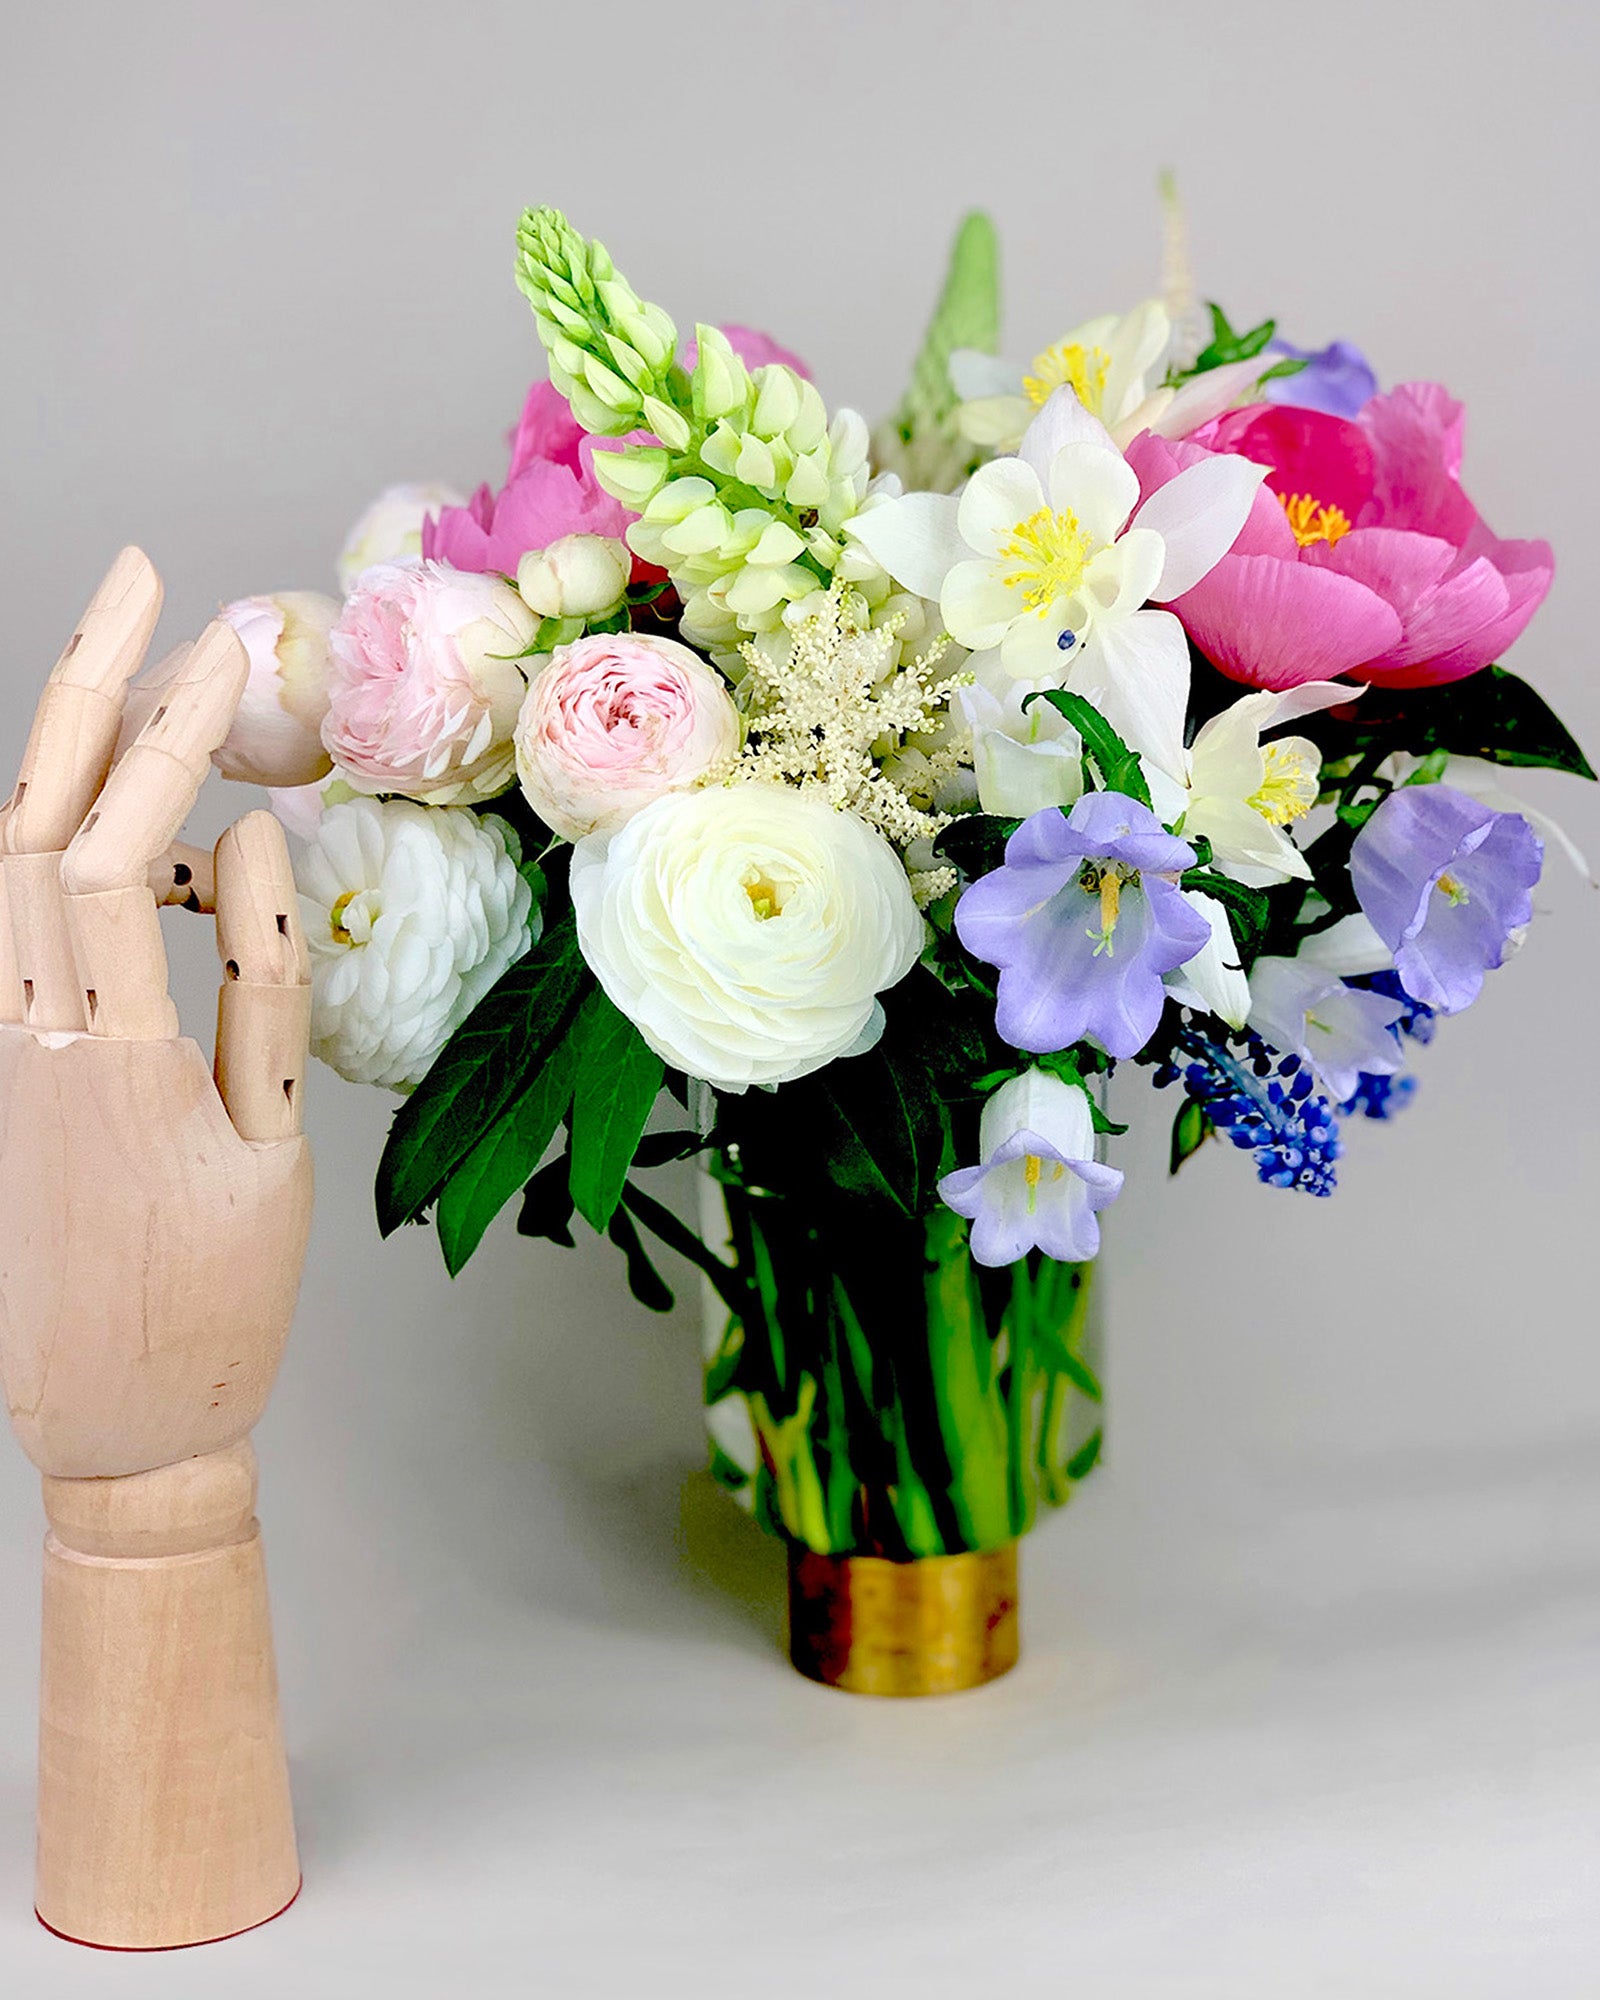 A vase of COLORFUL flowers next to a wooden mannequin by TAKAYASATO.COM creates a charming display.